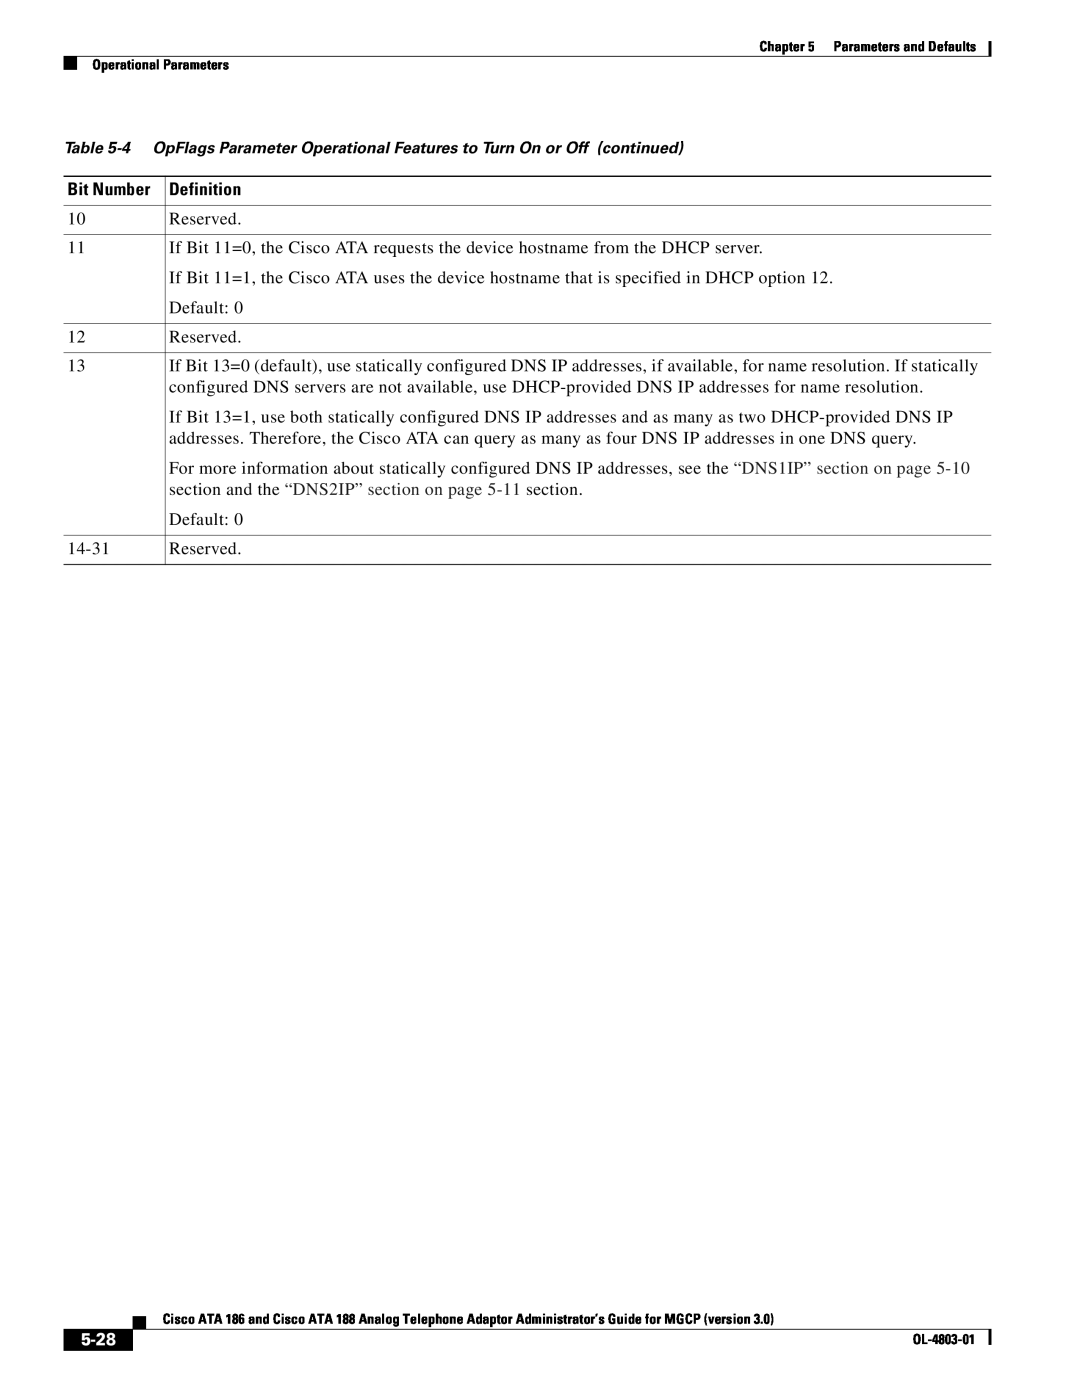 Cisco Systems ATA 186 manual 5-28, Bit Number Definition 